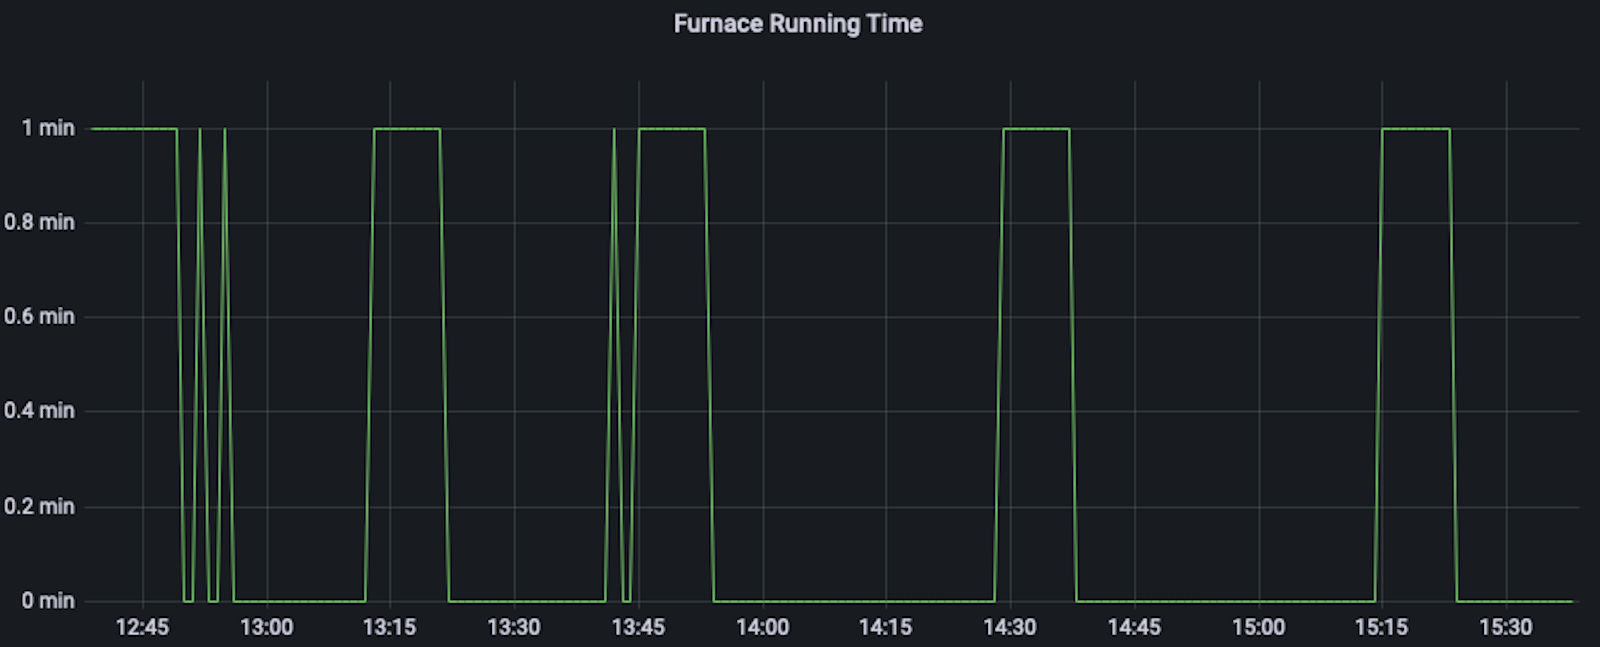 A Grafana panel with a graph showing time periods when a furnace was running.